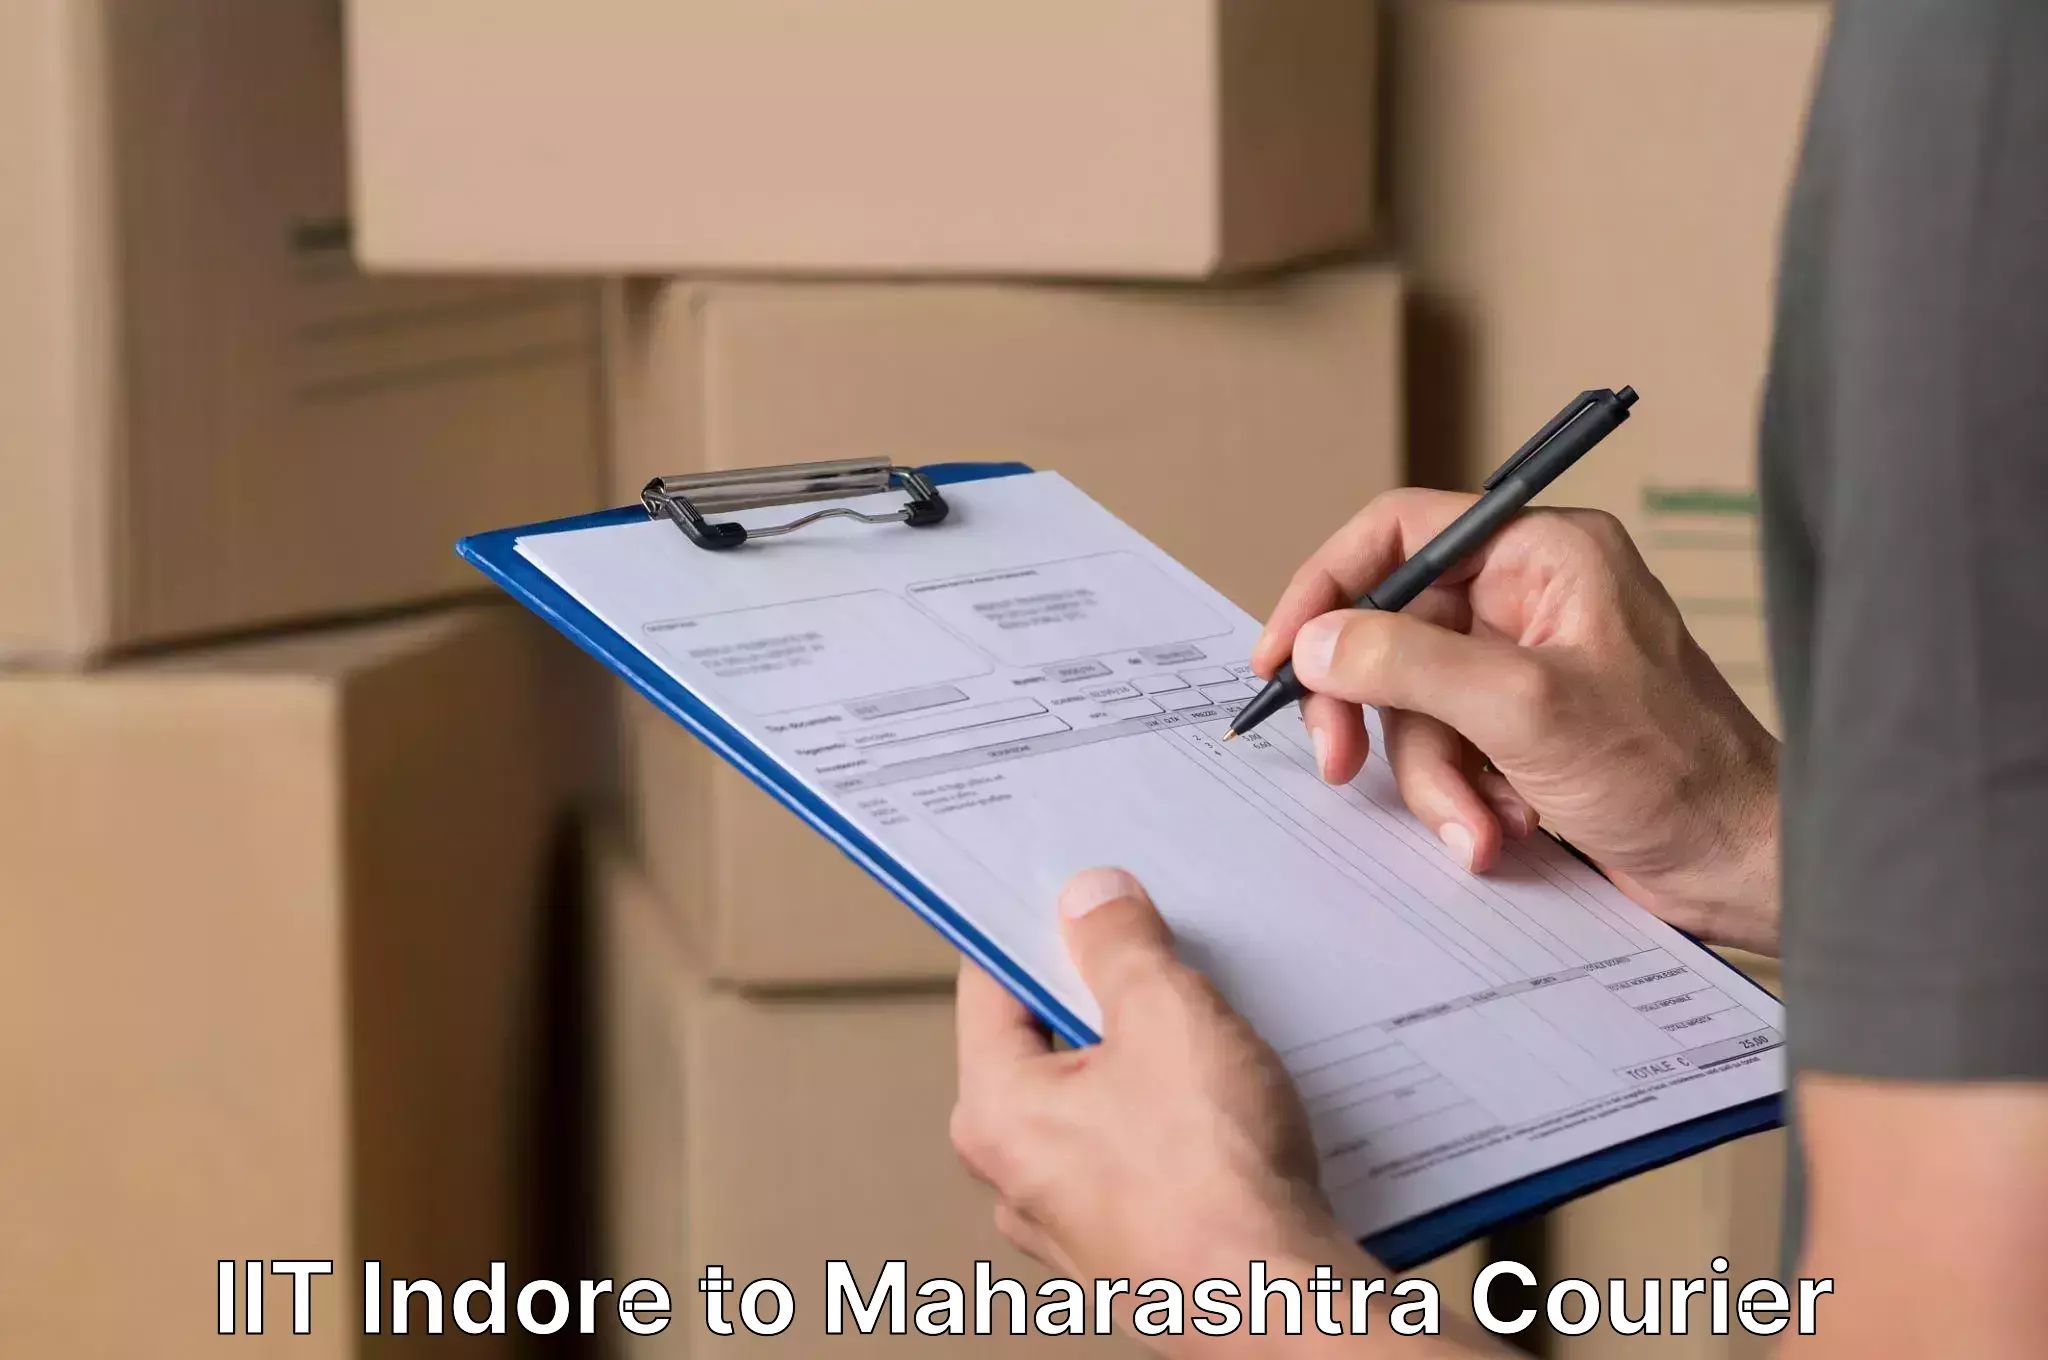 Furniture relocation services IIT Indore to Maharashtra